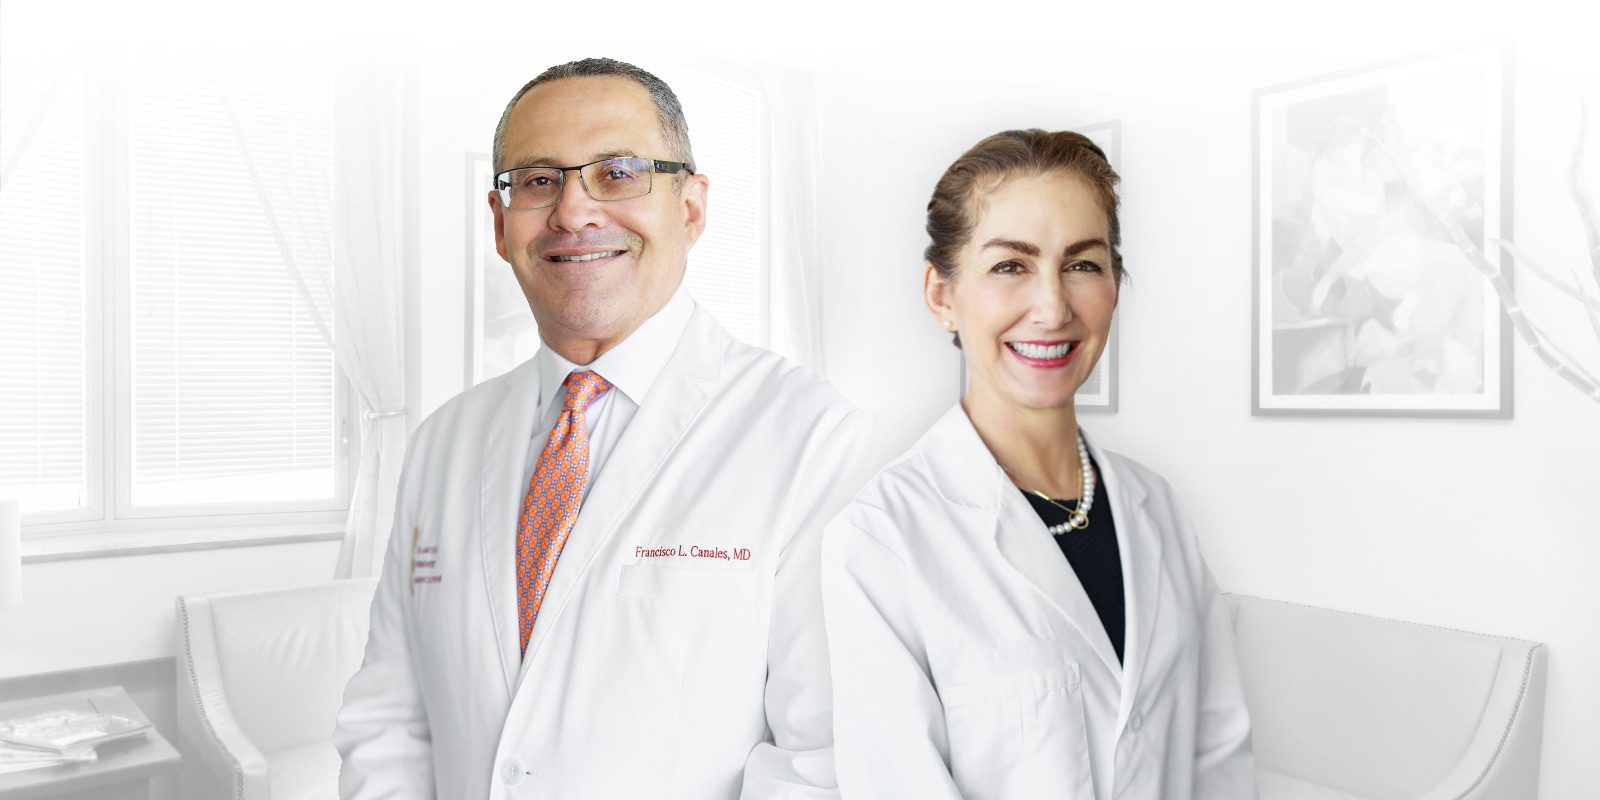 Dr. Canales and Dr. Furnas in white coats